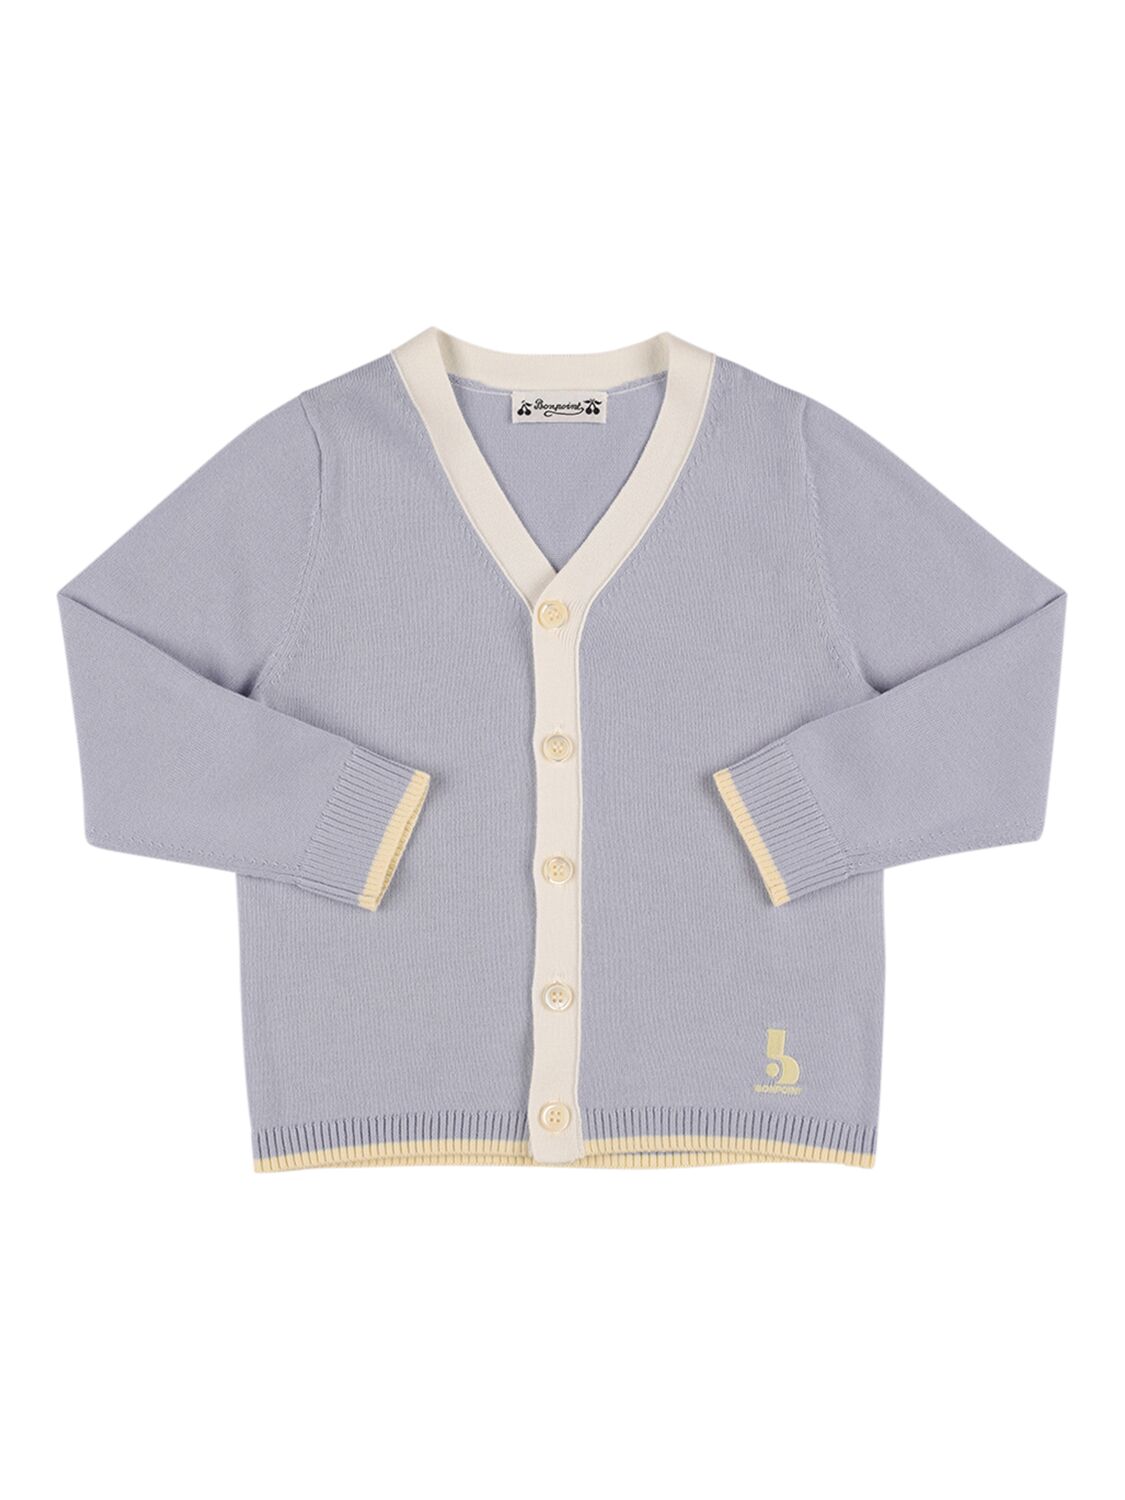 Bonpoint Kids' Embroidered Cotton Knit Cardigan In Blue